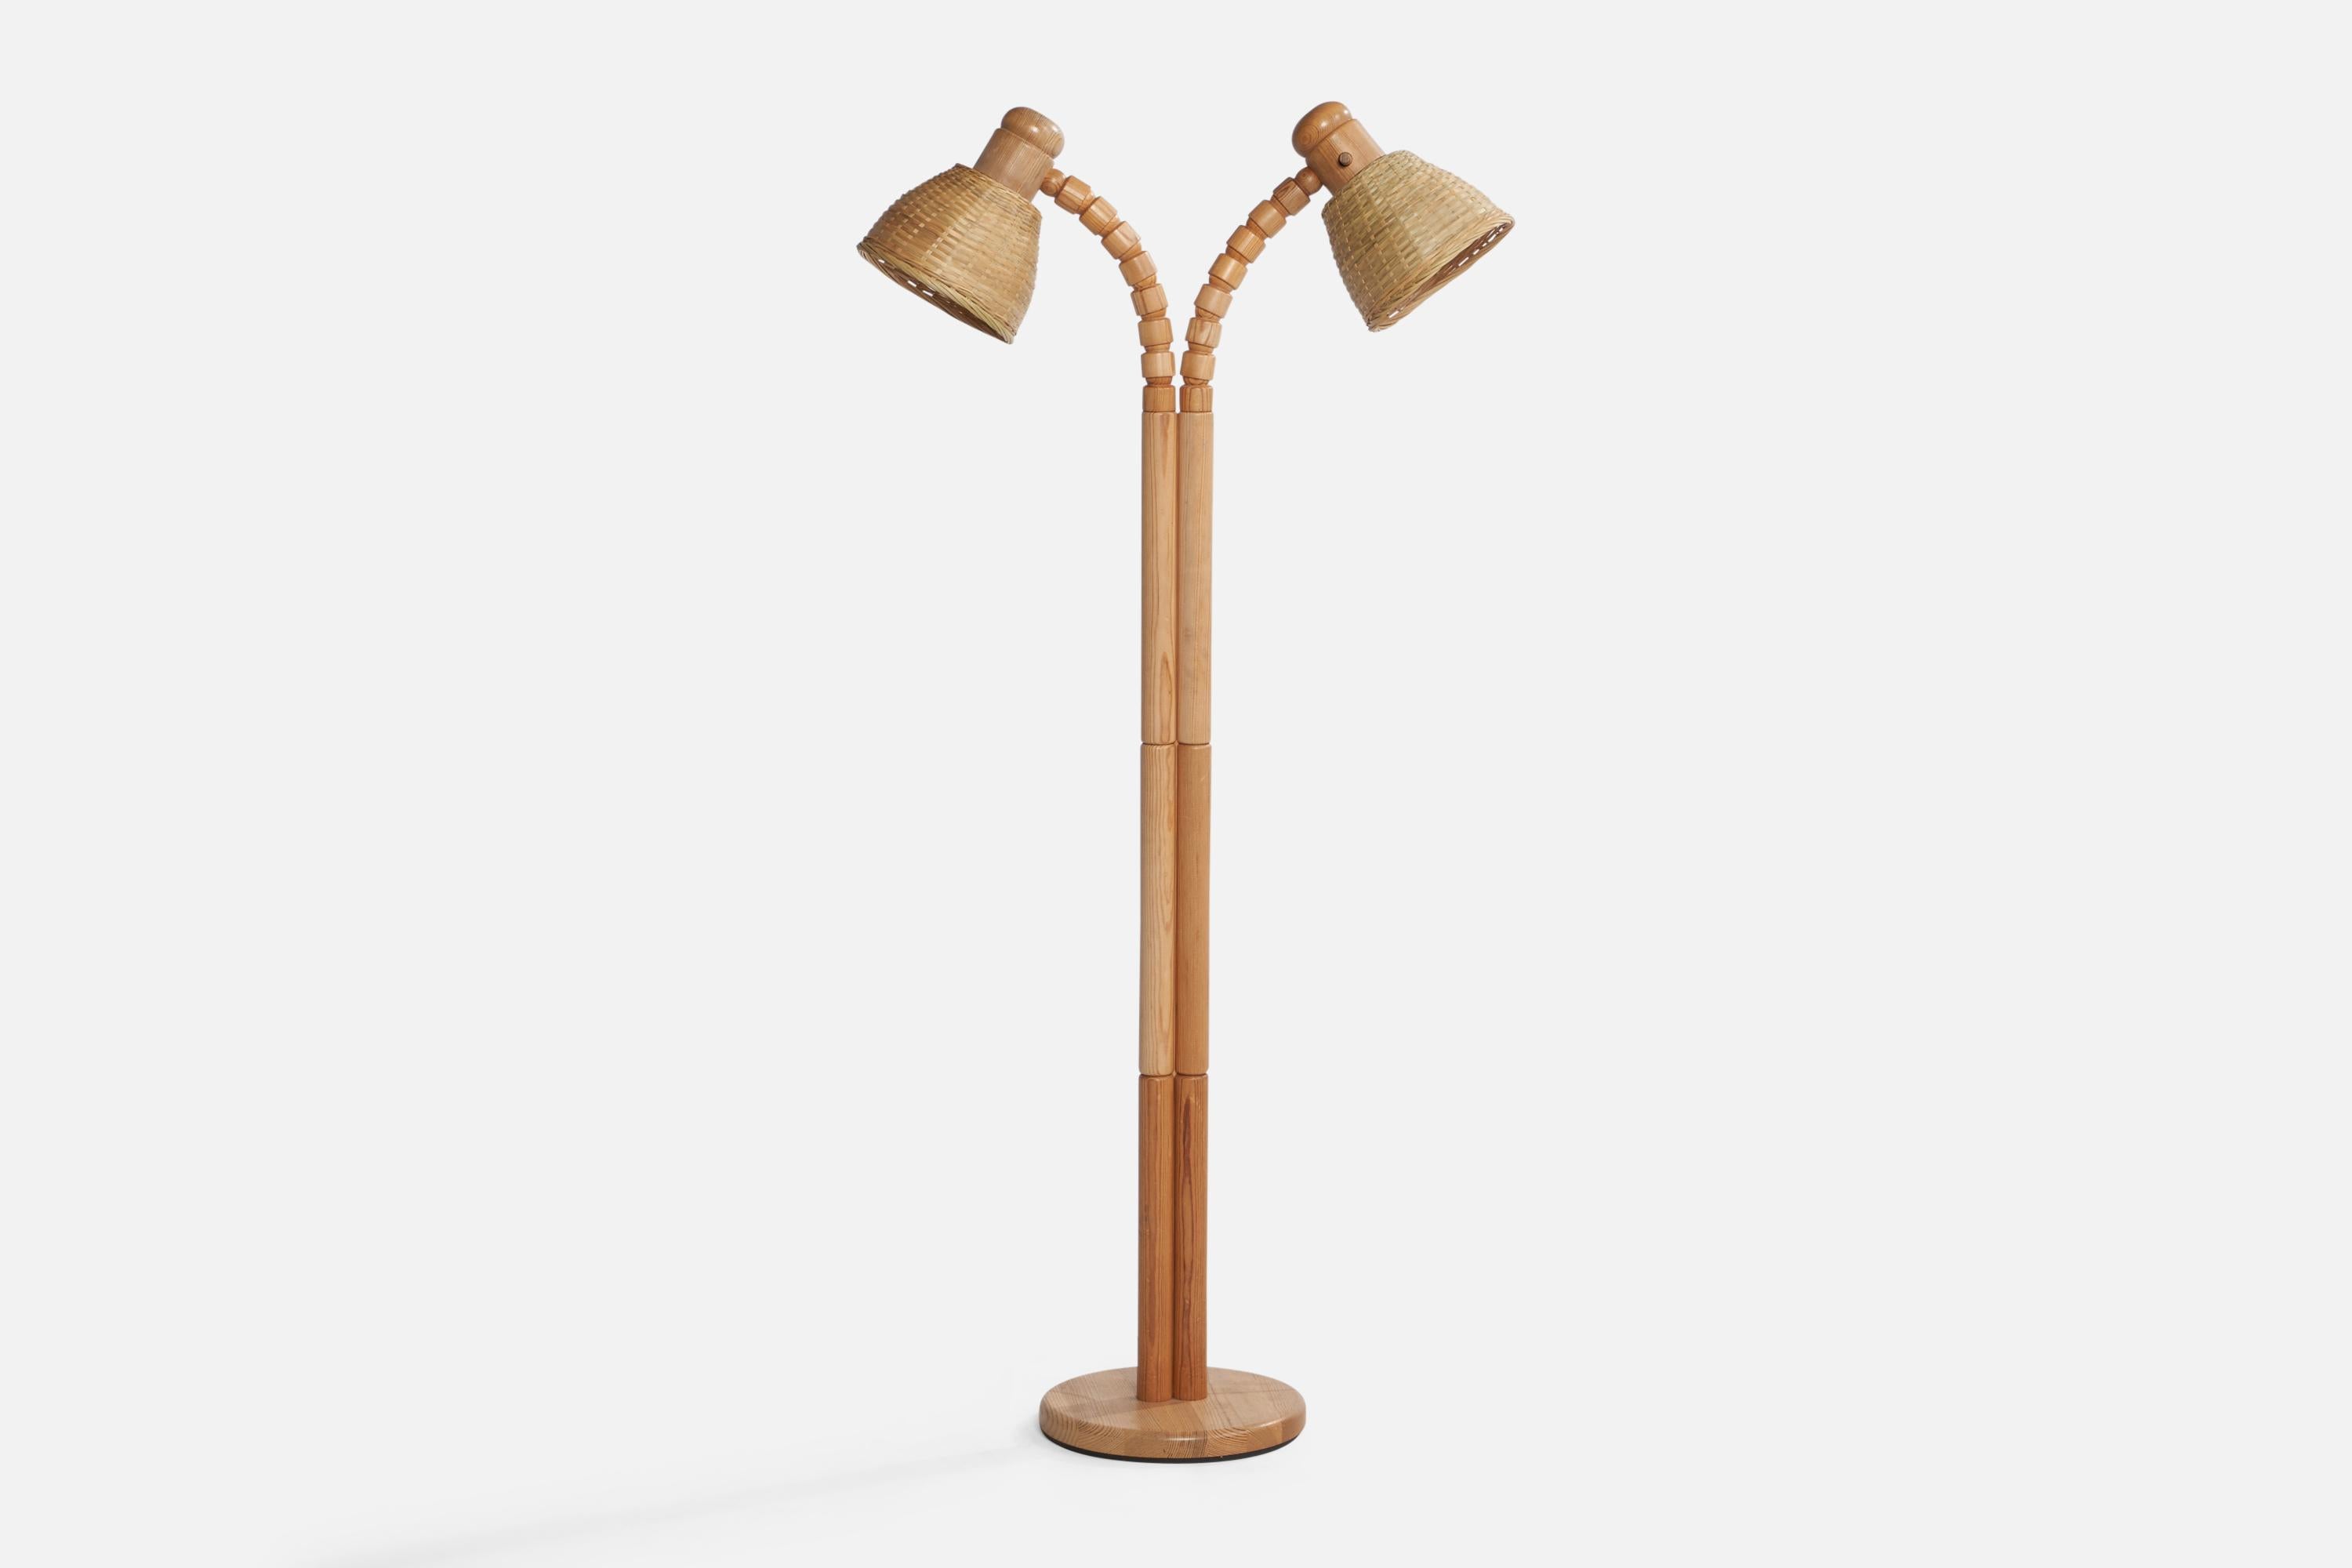 An adjustable two-armed pine and rattan floor lamp designed and produced in Sweden, c. 1970s.

Overall Dimensions (inches): 50.75” x 27.75” W x 11” D. Stated dimensions include shades.
Dimensions vary based on position of lights. Stated dimensions